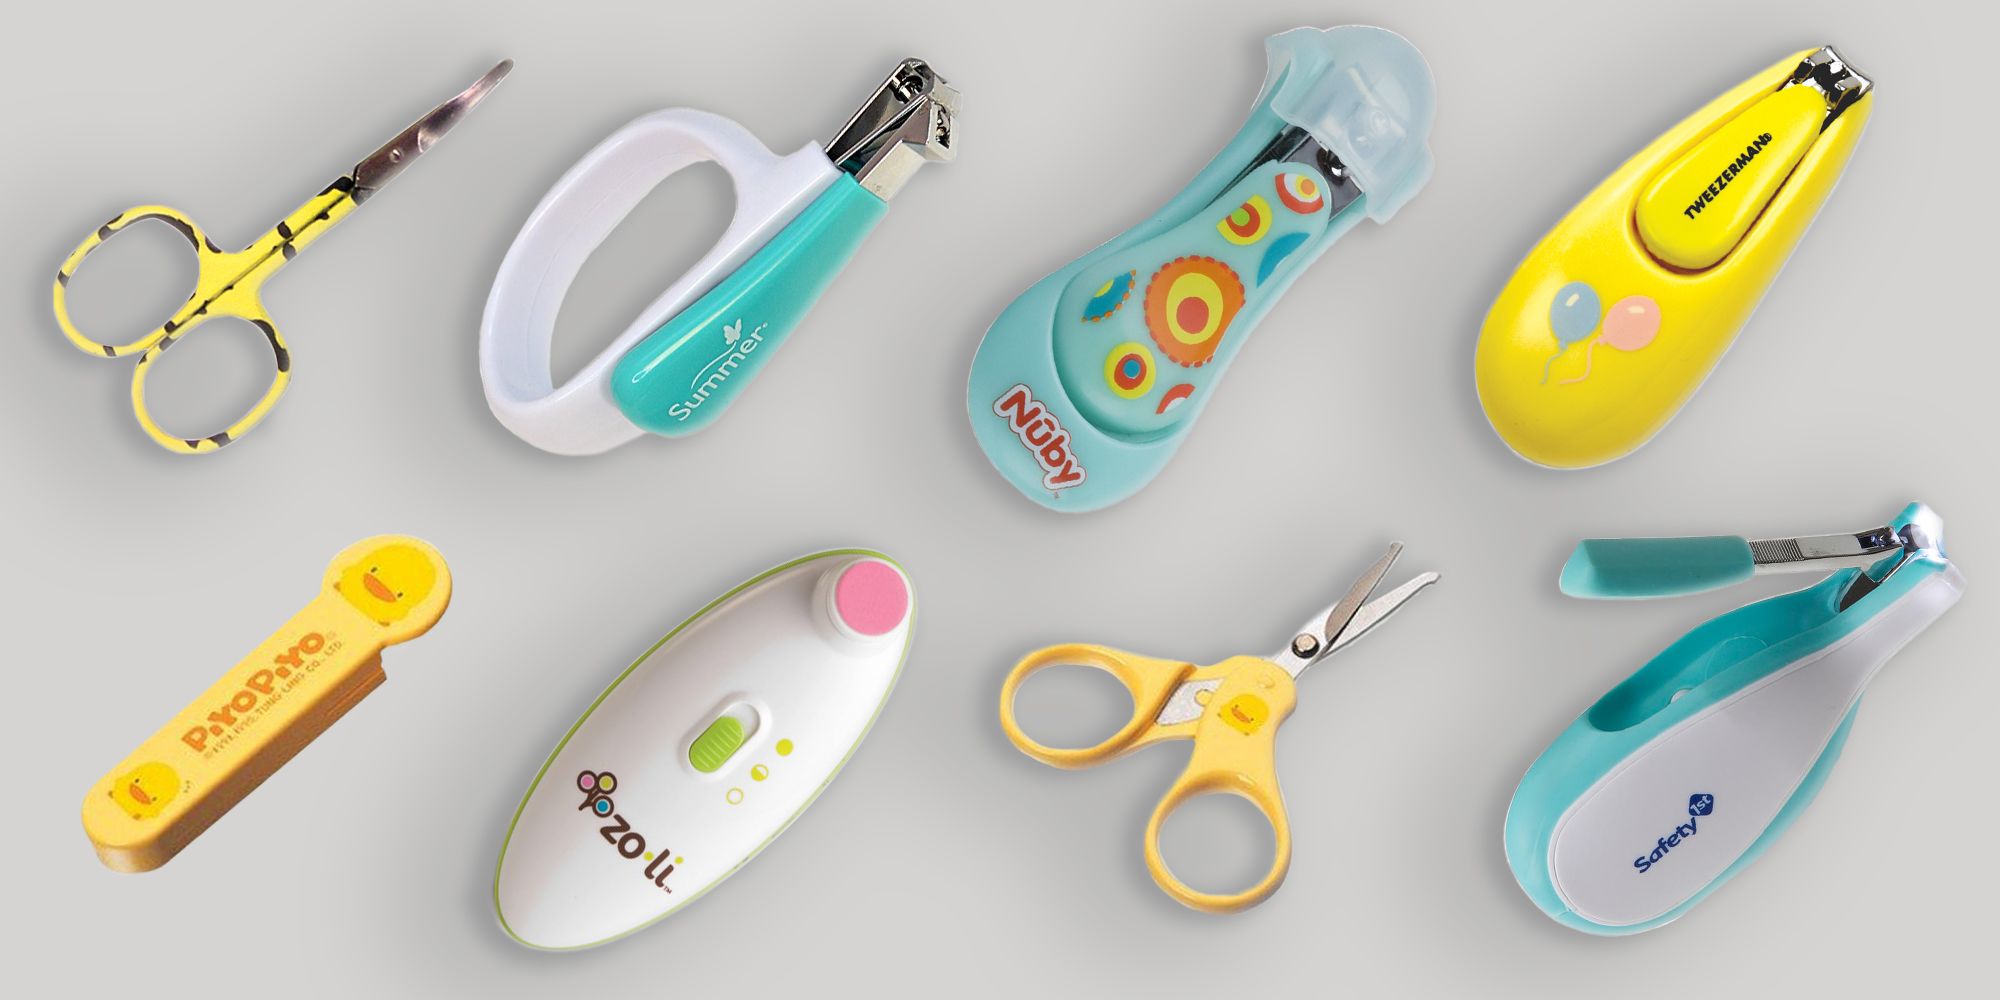 DMG-Baby Nail Trimmer, Electric Baby Nail File Tool Nail Clippers Set  Trimmer Set, Suitable For Newborns Baby Beauty And Manicure Set-toe, Nail  Care, Polishing And Decoration price in Saudi Arabia | Amazon